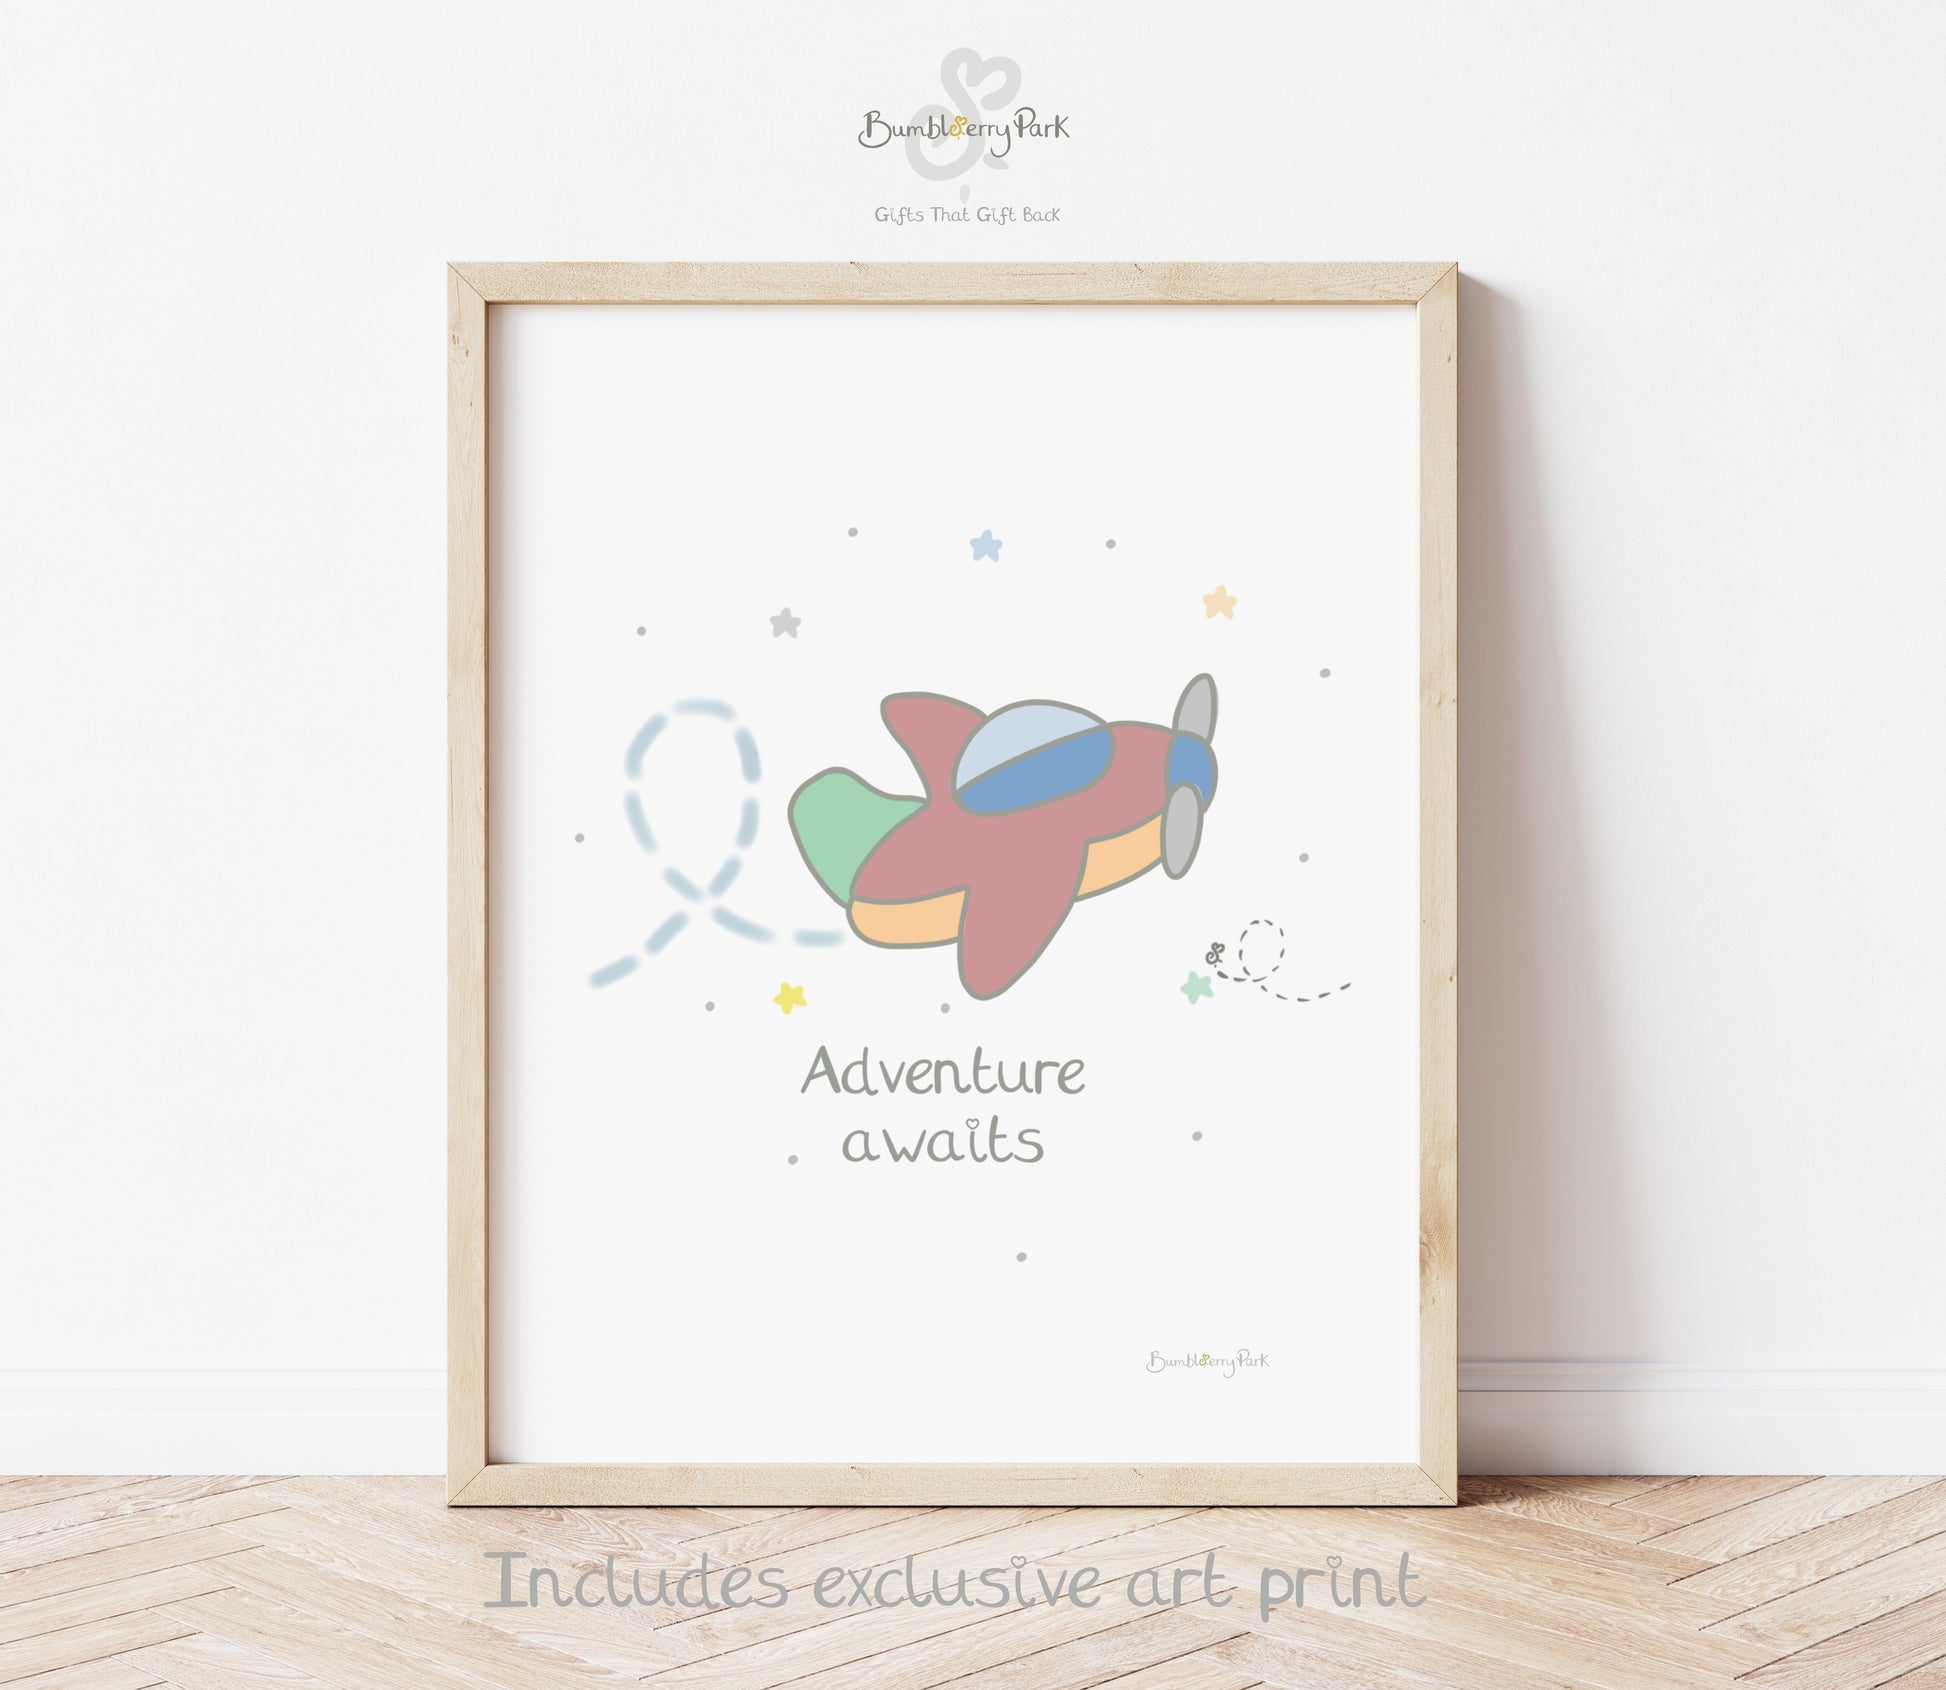 nursery print of bright colourful aeroplane and quote "adventure awaits"